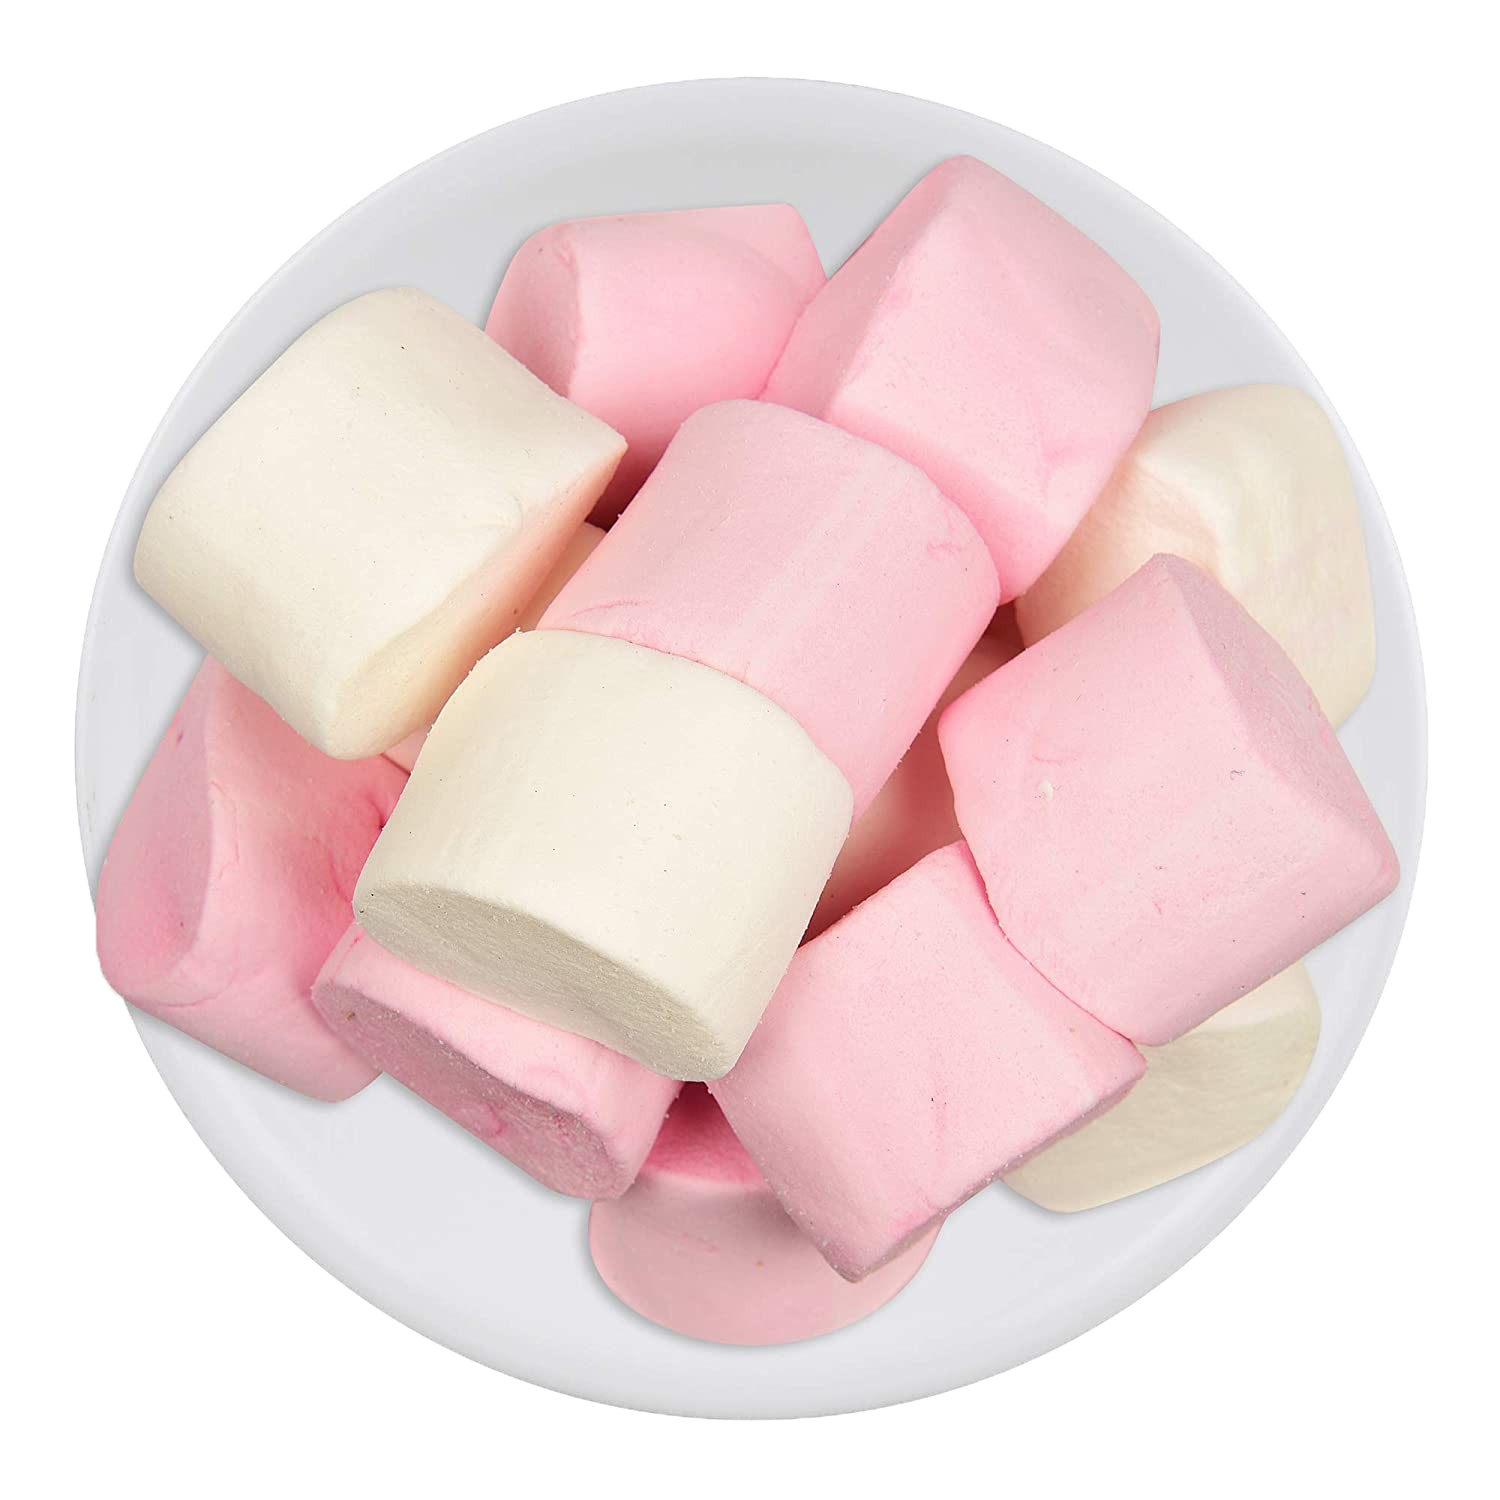 A Plate Of Marshmallows